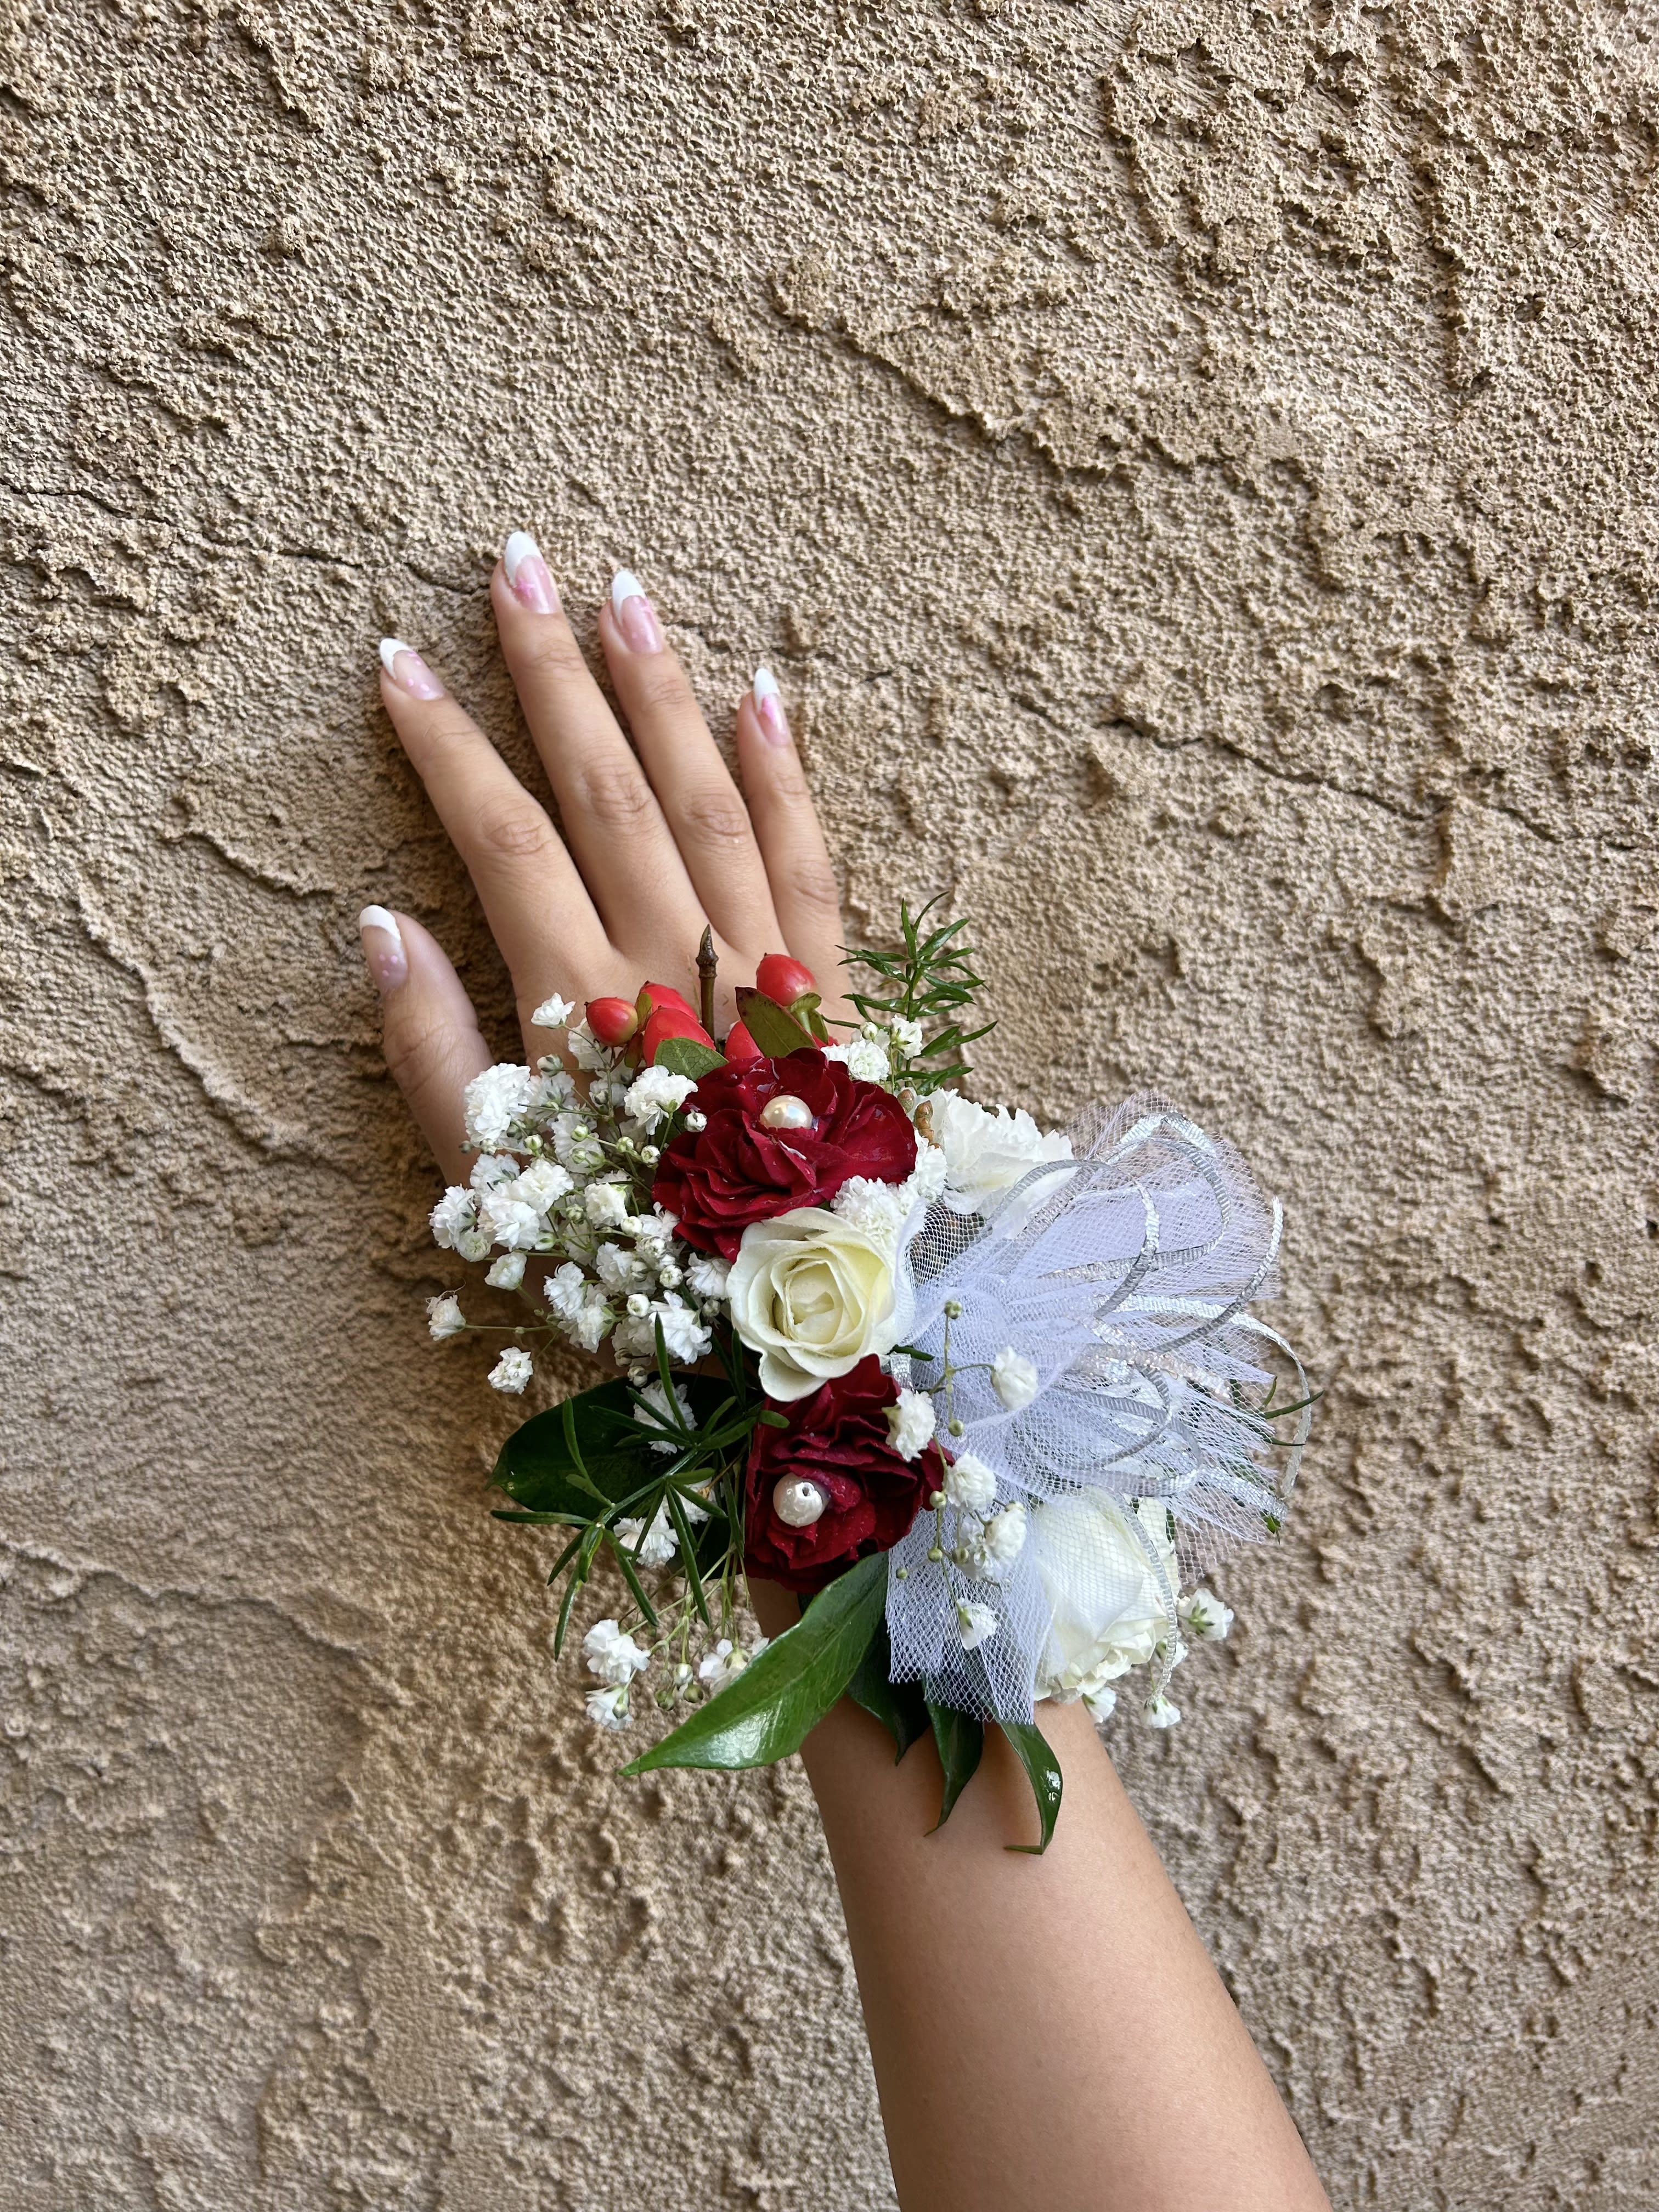 Wrist Corsage 8 - Wrist corsage with white and red flowers with accents. CUSTOMER CAN CHOOSE ANY COLOR STANDARD: WRIST CORSAGE DELUXE: WRIST CORSAGE + BOUTONNIERE